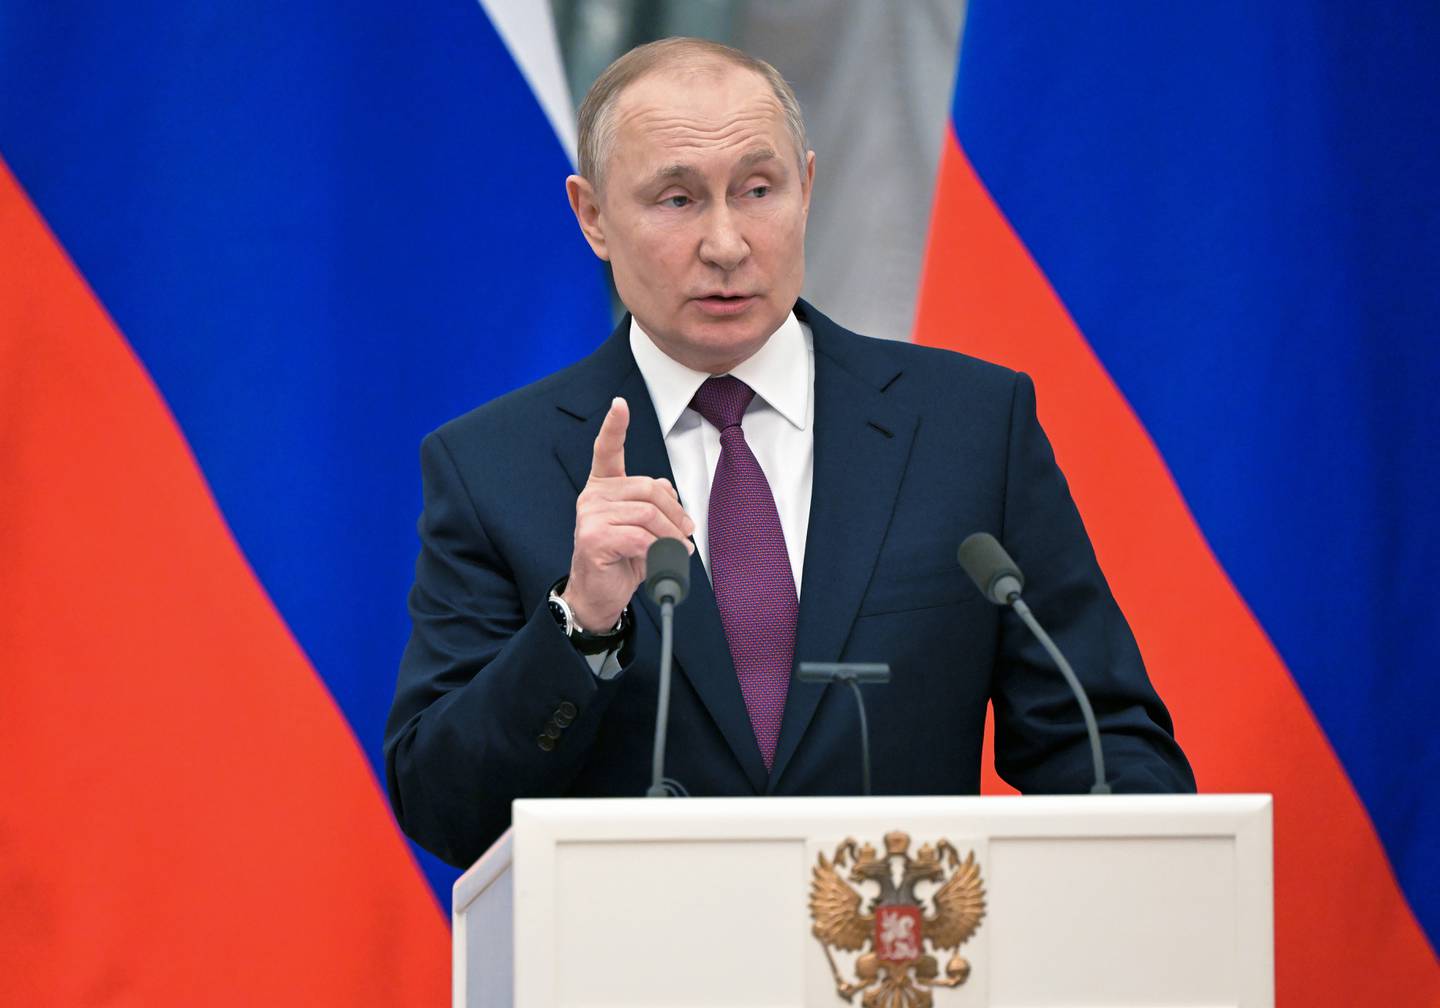 Russian President Vladimir Putin has been able to once again dominate the world stage, raising his country's profile. AP